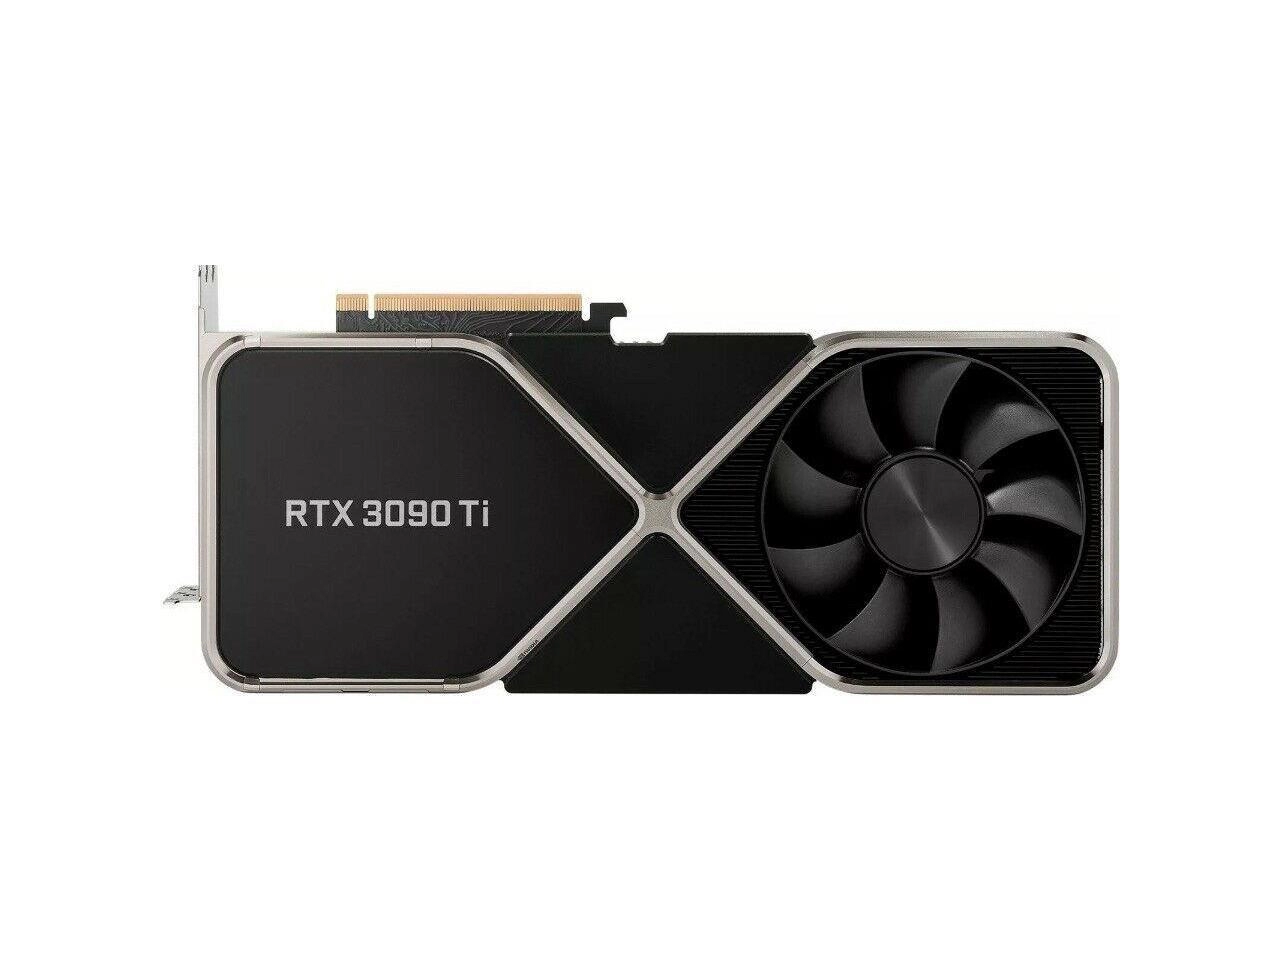 NVIDIA GeForce RTX 3090 Ti Founders Edition Image